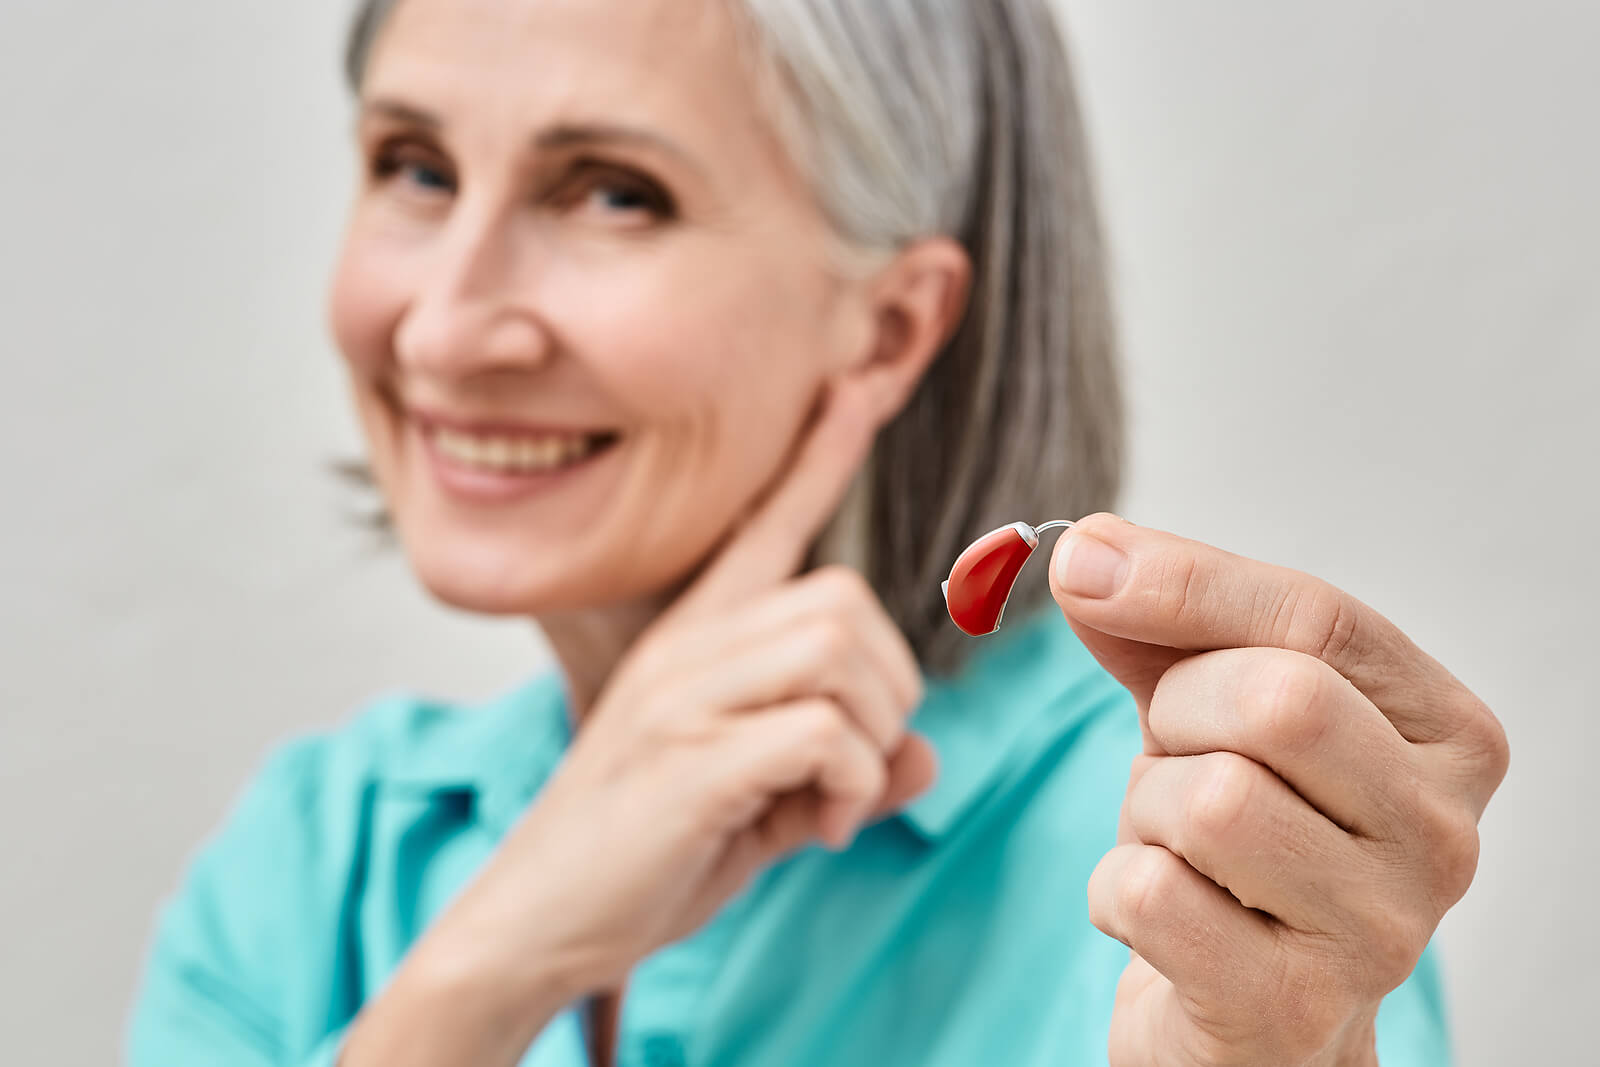 Woman holding hearing aid and pointing at ear